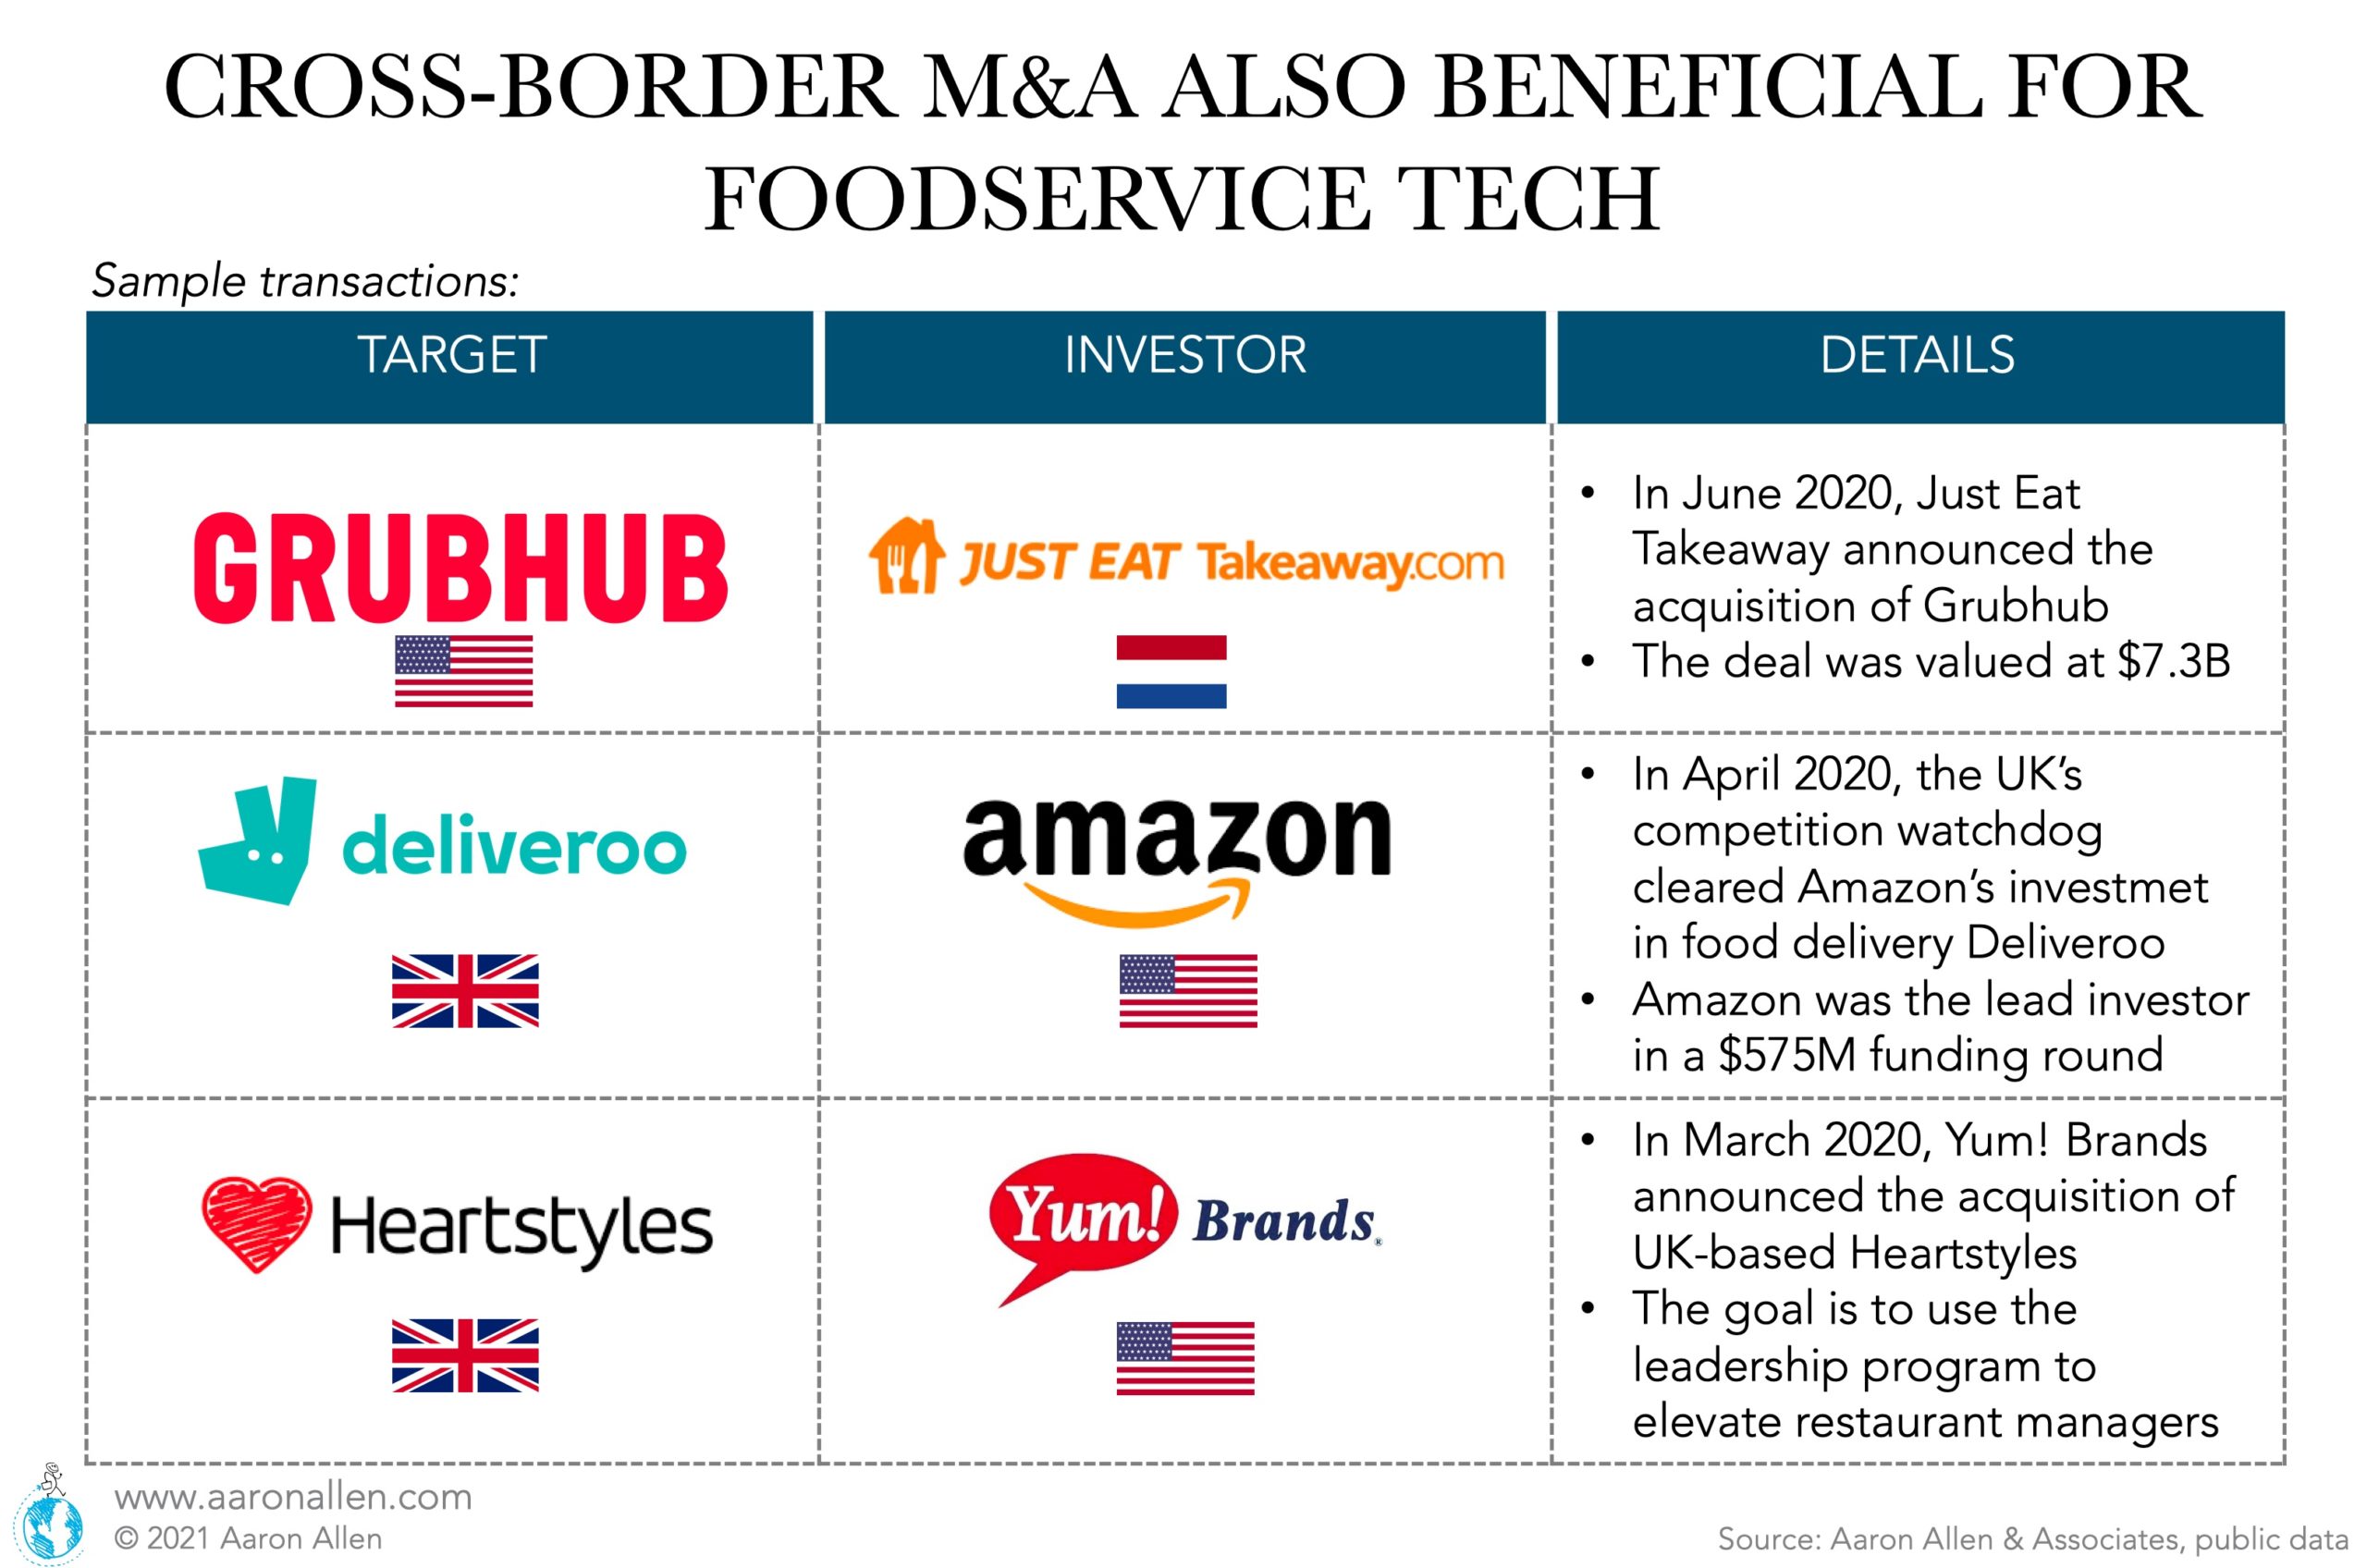 While cross-border M&A is often used to quickly penetrate new markets, in the foodservice industry it can also be a way to buy into a franchisor (mostly U.S.-based brands with an established history) rather than acquiring franchisee rights to expand somebody else’s brand in a different territory. Why just be a franchisee when you can buy into the franchisor?  The benefits of cross-border M&A don’t only apply to restaurant chains. In fact, there has been some notable international investment activity related to foodservice technology. Acquiring the IP that comes with tech companies is one of the top reasons for cross-border M&A.   We continue to come across a number of exciting — and potentially transformative — foodservice tech platforms geared toward solving some of the most salient pain points in the restaurant industry.